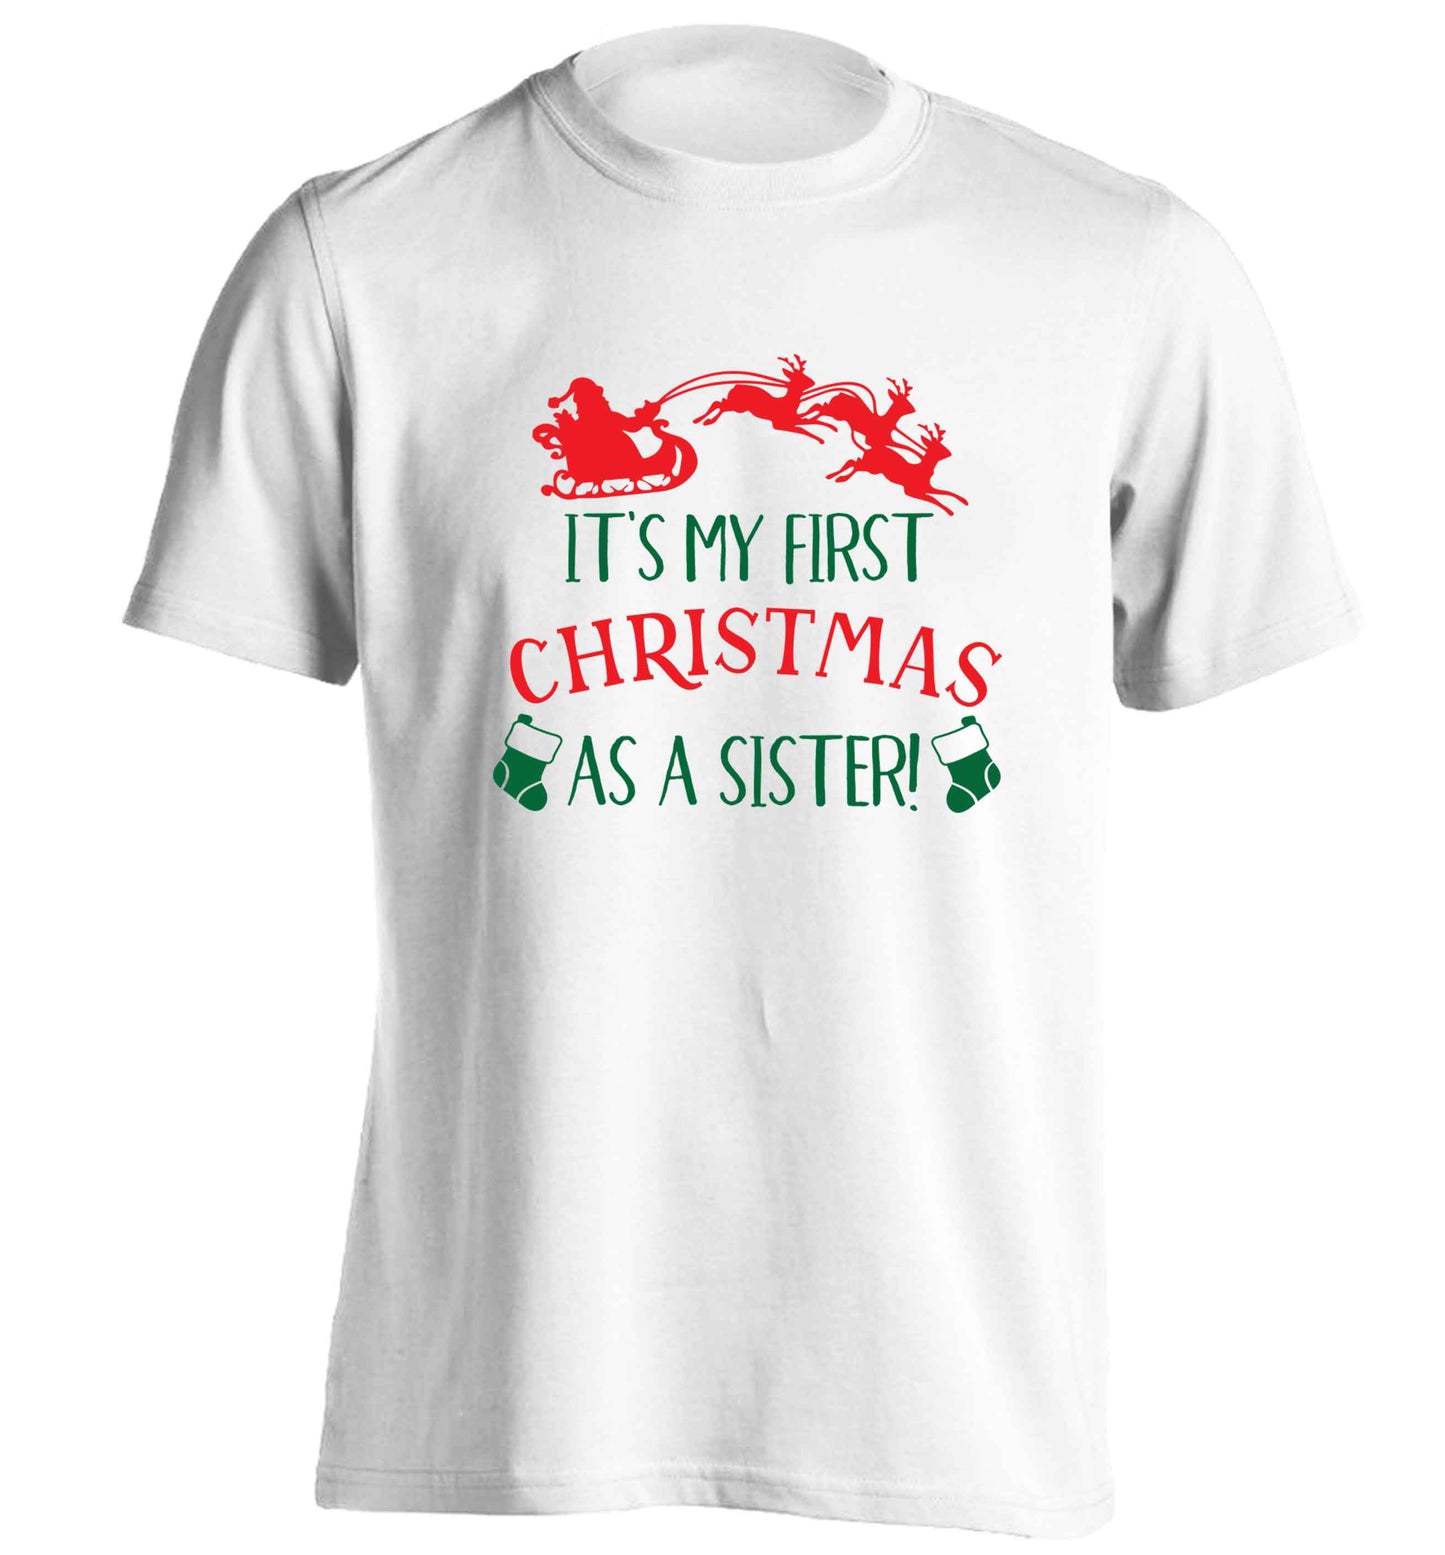 It's my first Christmas as a sister! adults unisex white Tshirt 2XL